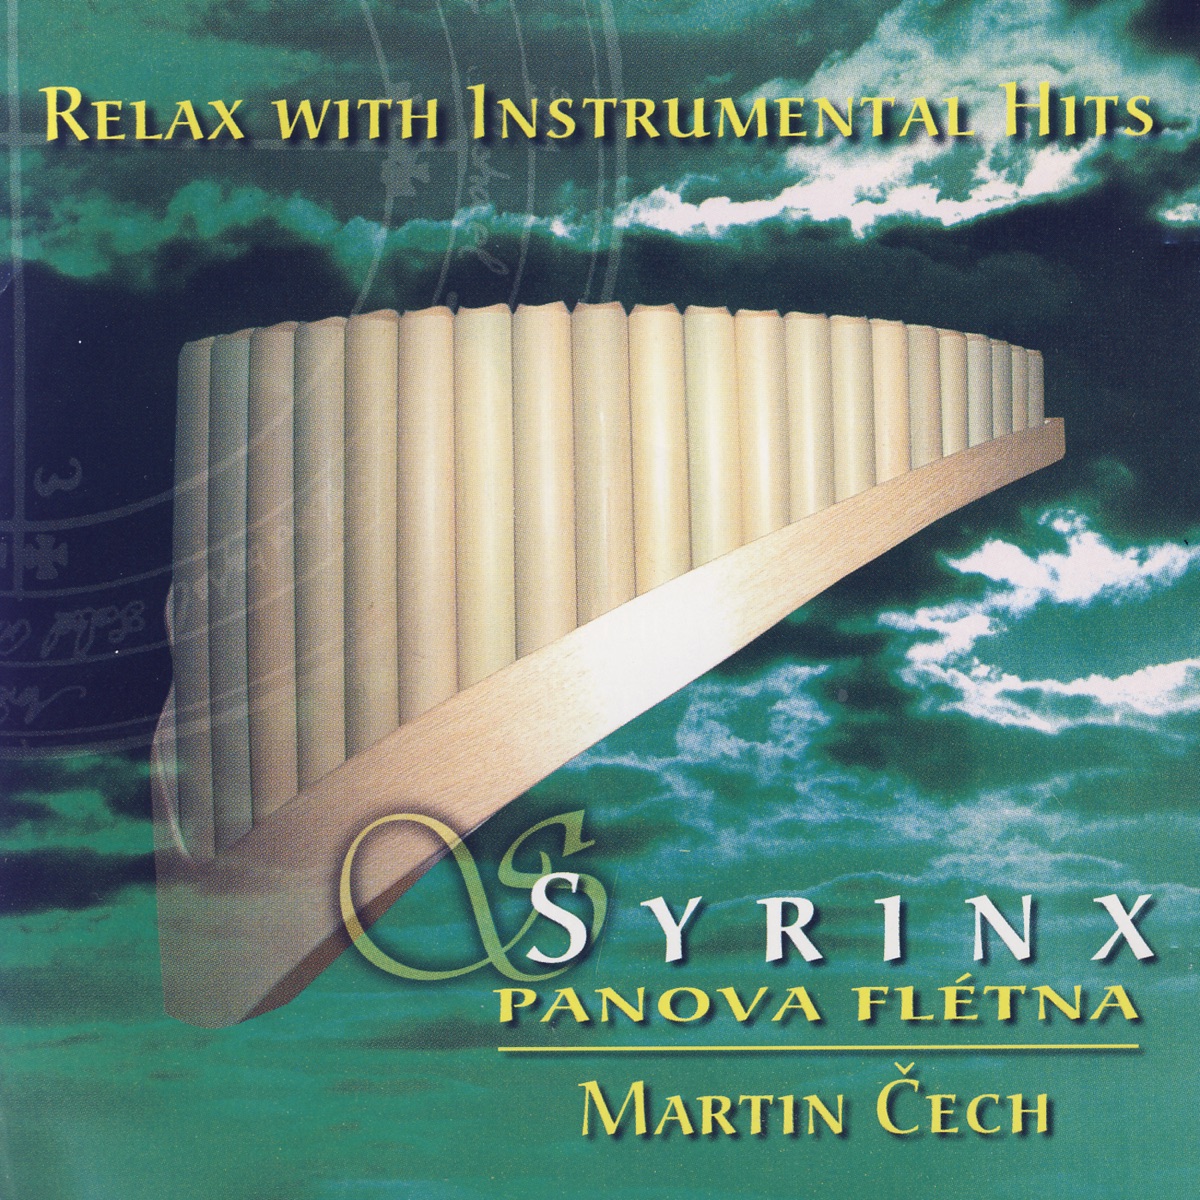 Relax With Instrumental Hits - Syrinx - Album by Martin Cech - Apple Music